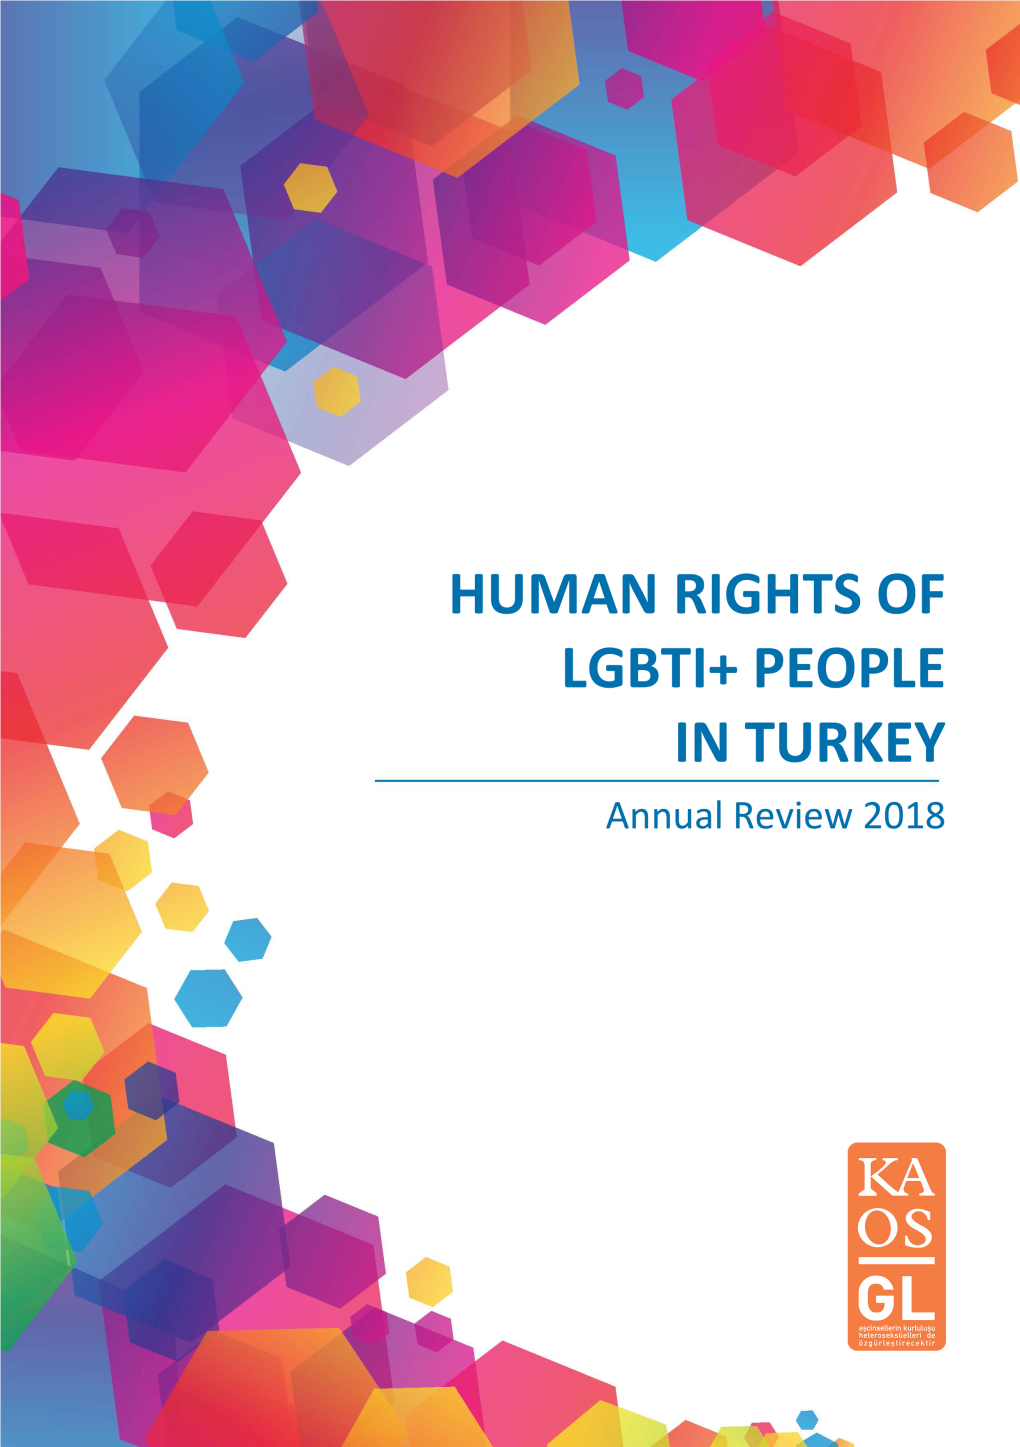 Human Rights of Lgbti+ People in Turkey Annual Review 2018